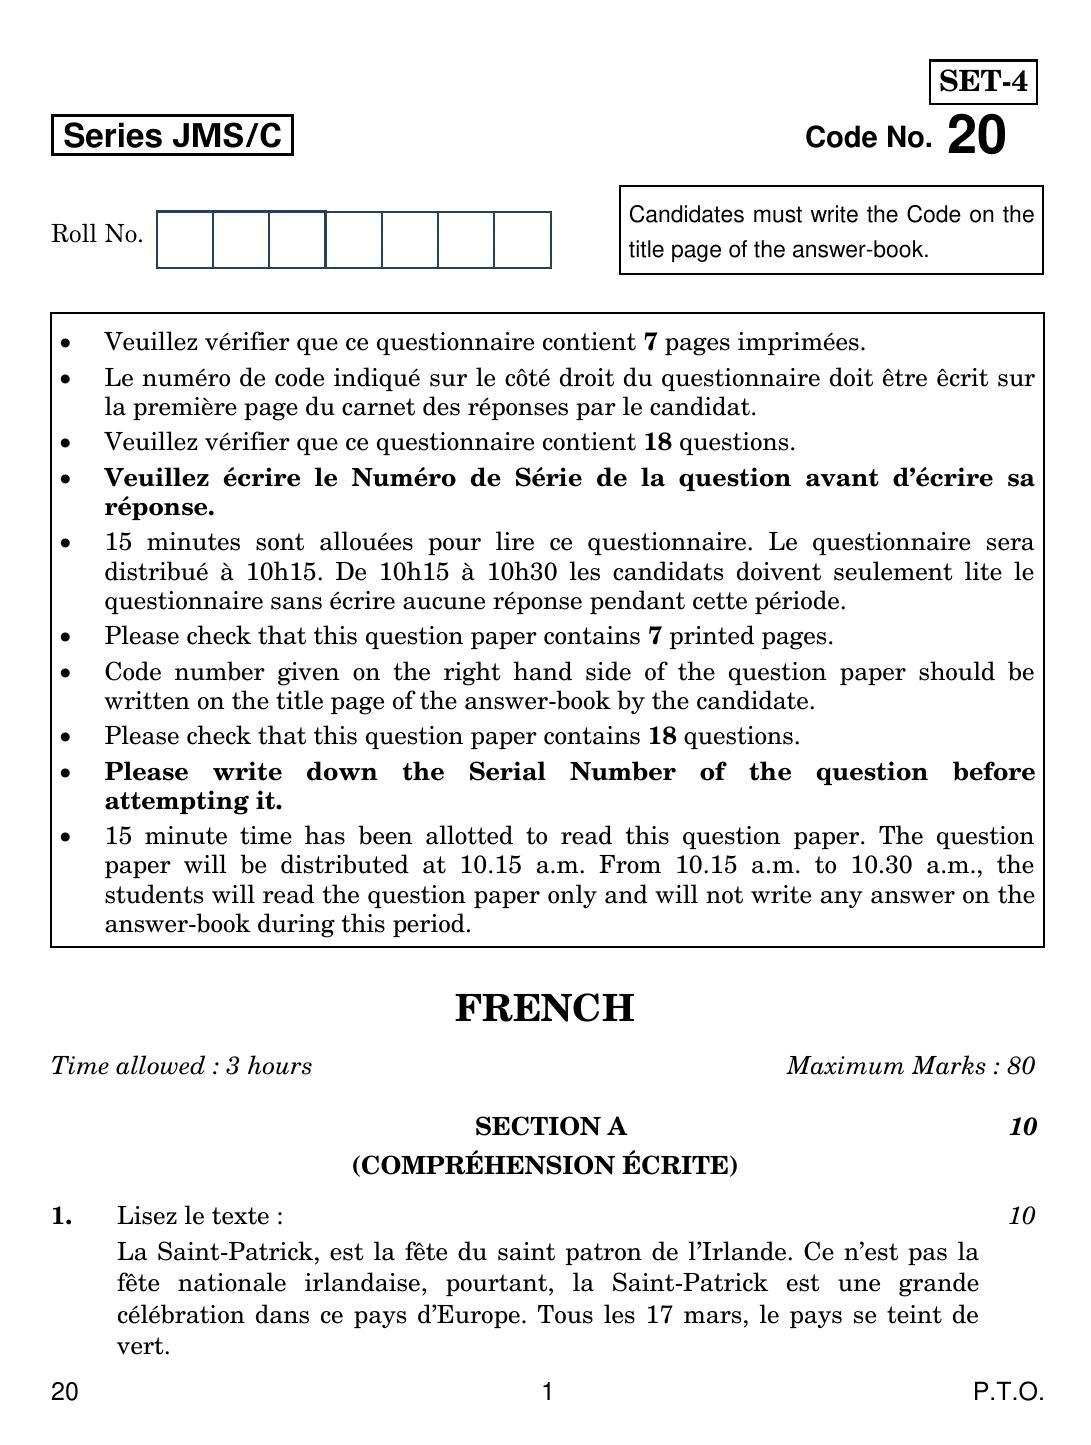 CBSE Class 10 20 French 2019 Compartment Question Paper - Page 1